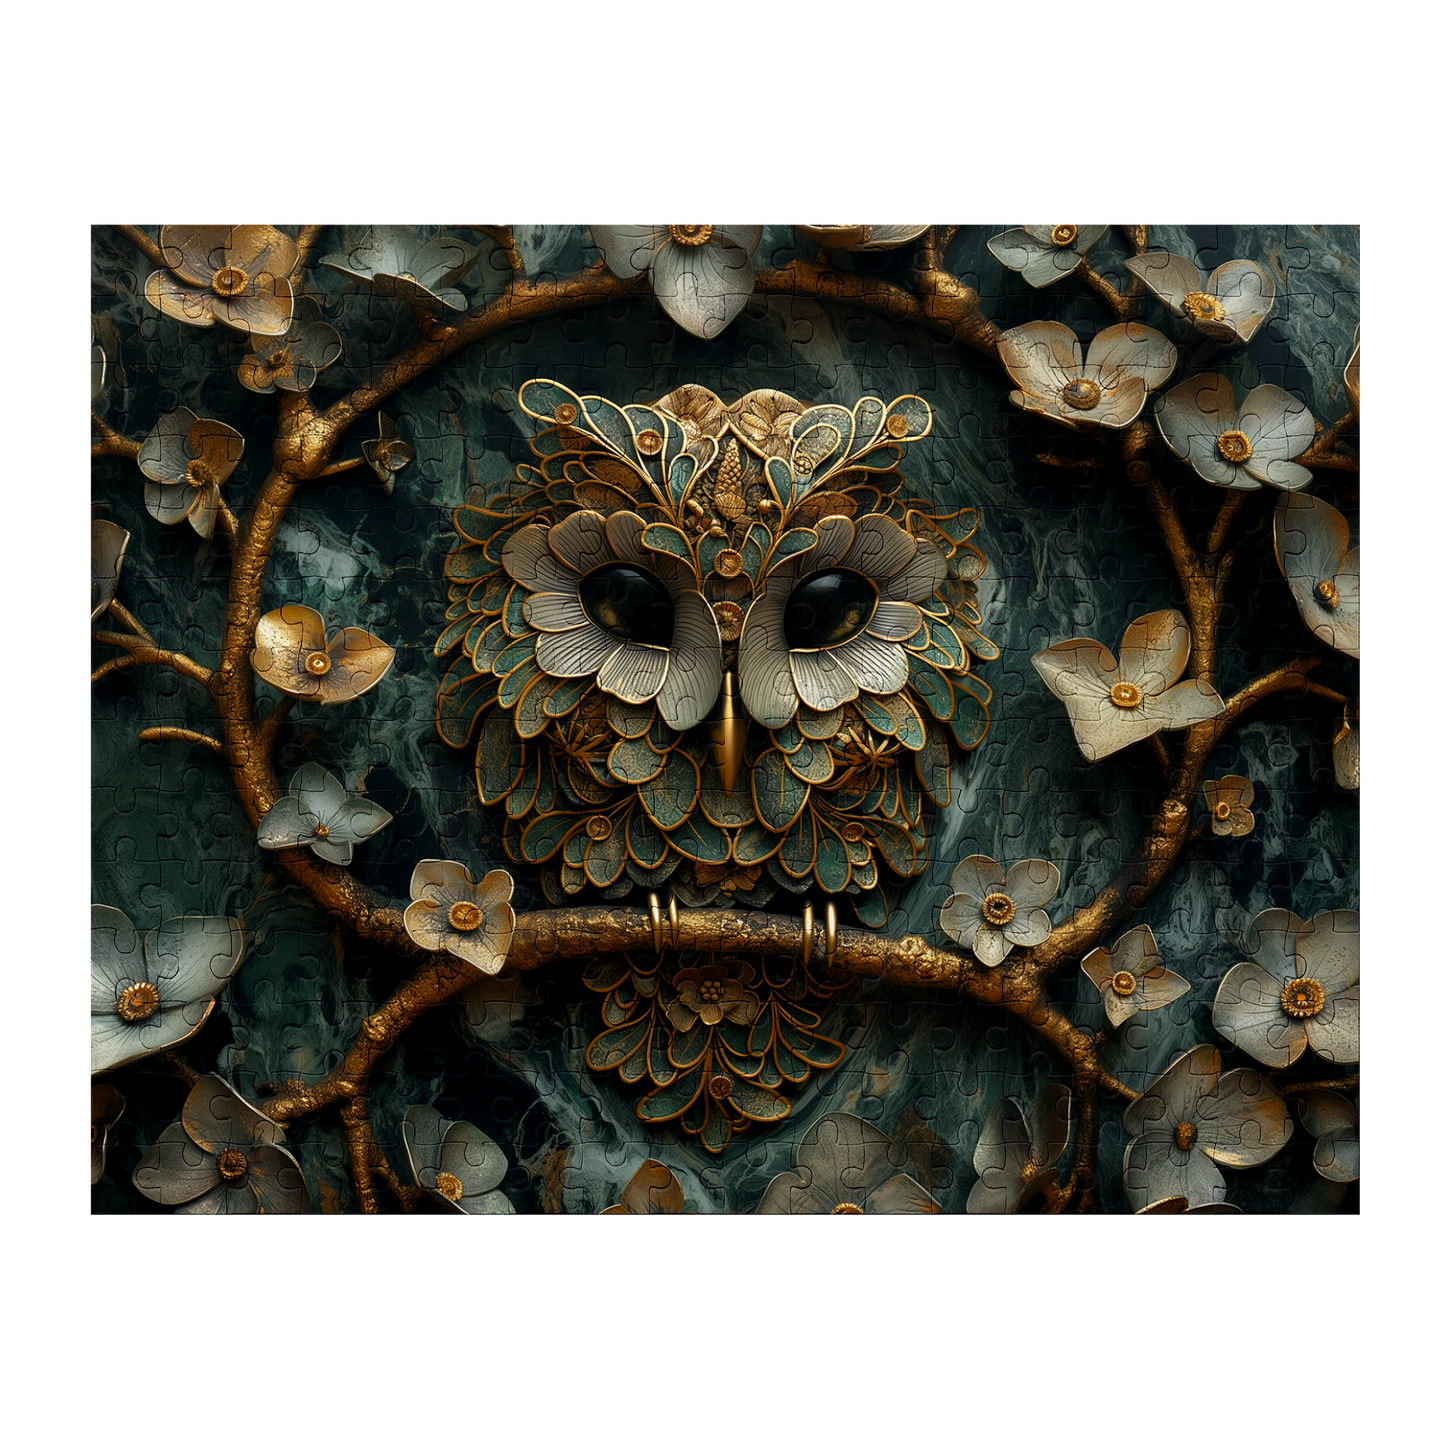 Nightbird 01 - Premium Jigsaw Puzzle, Ornate, Crafted - Multiple Sizes Available